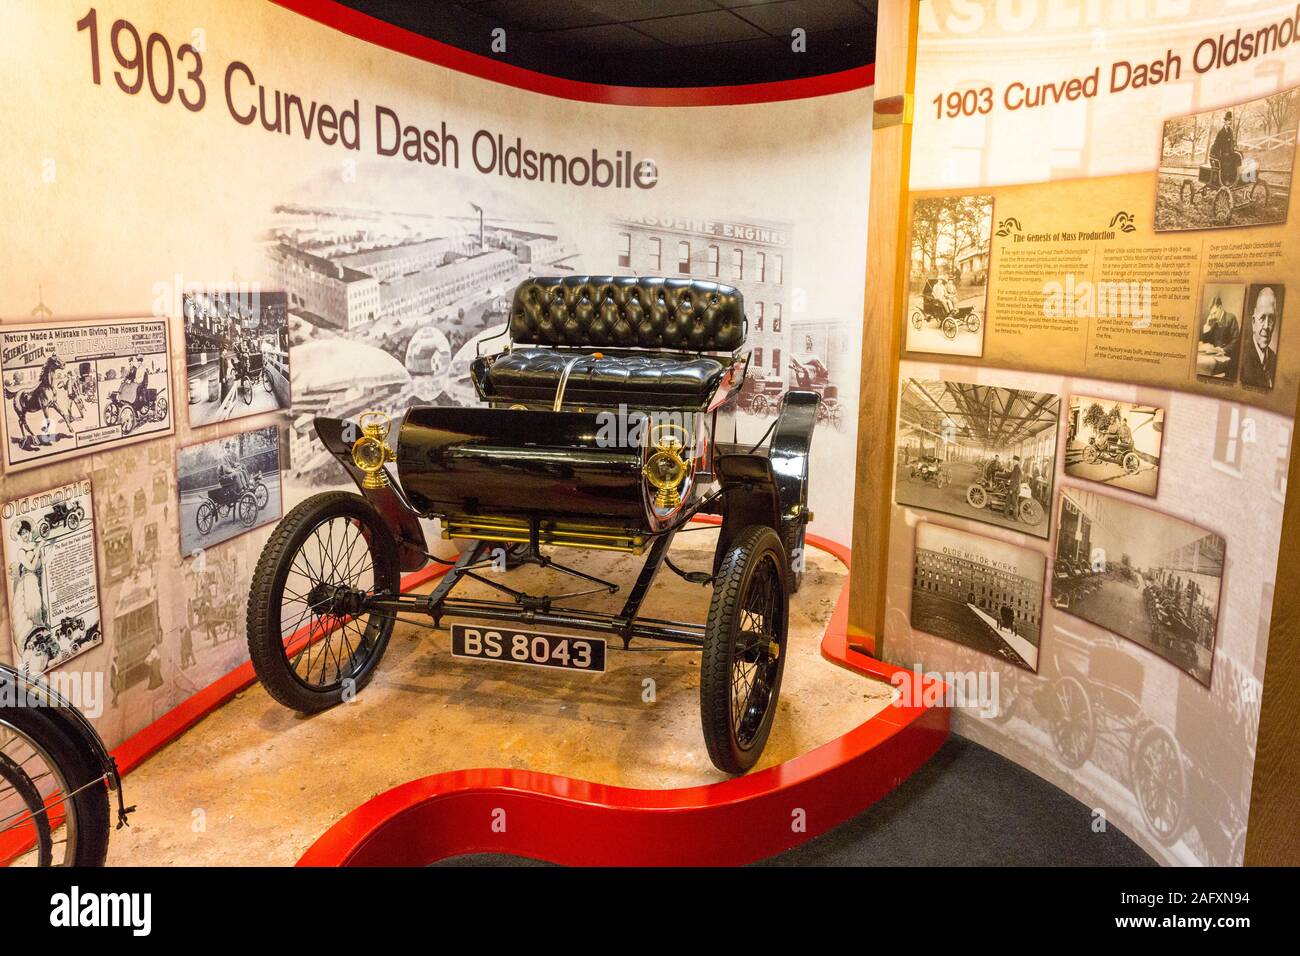 A 1903 Curved Dash Oldsmobile at the Haynes International Motor Museum, Sparkford, Somerset, UK Stock Photo